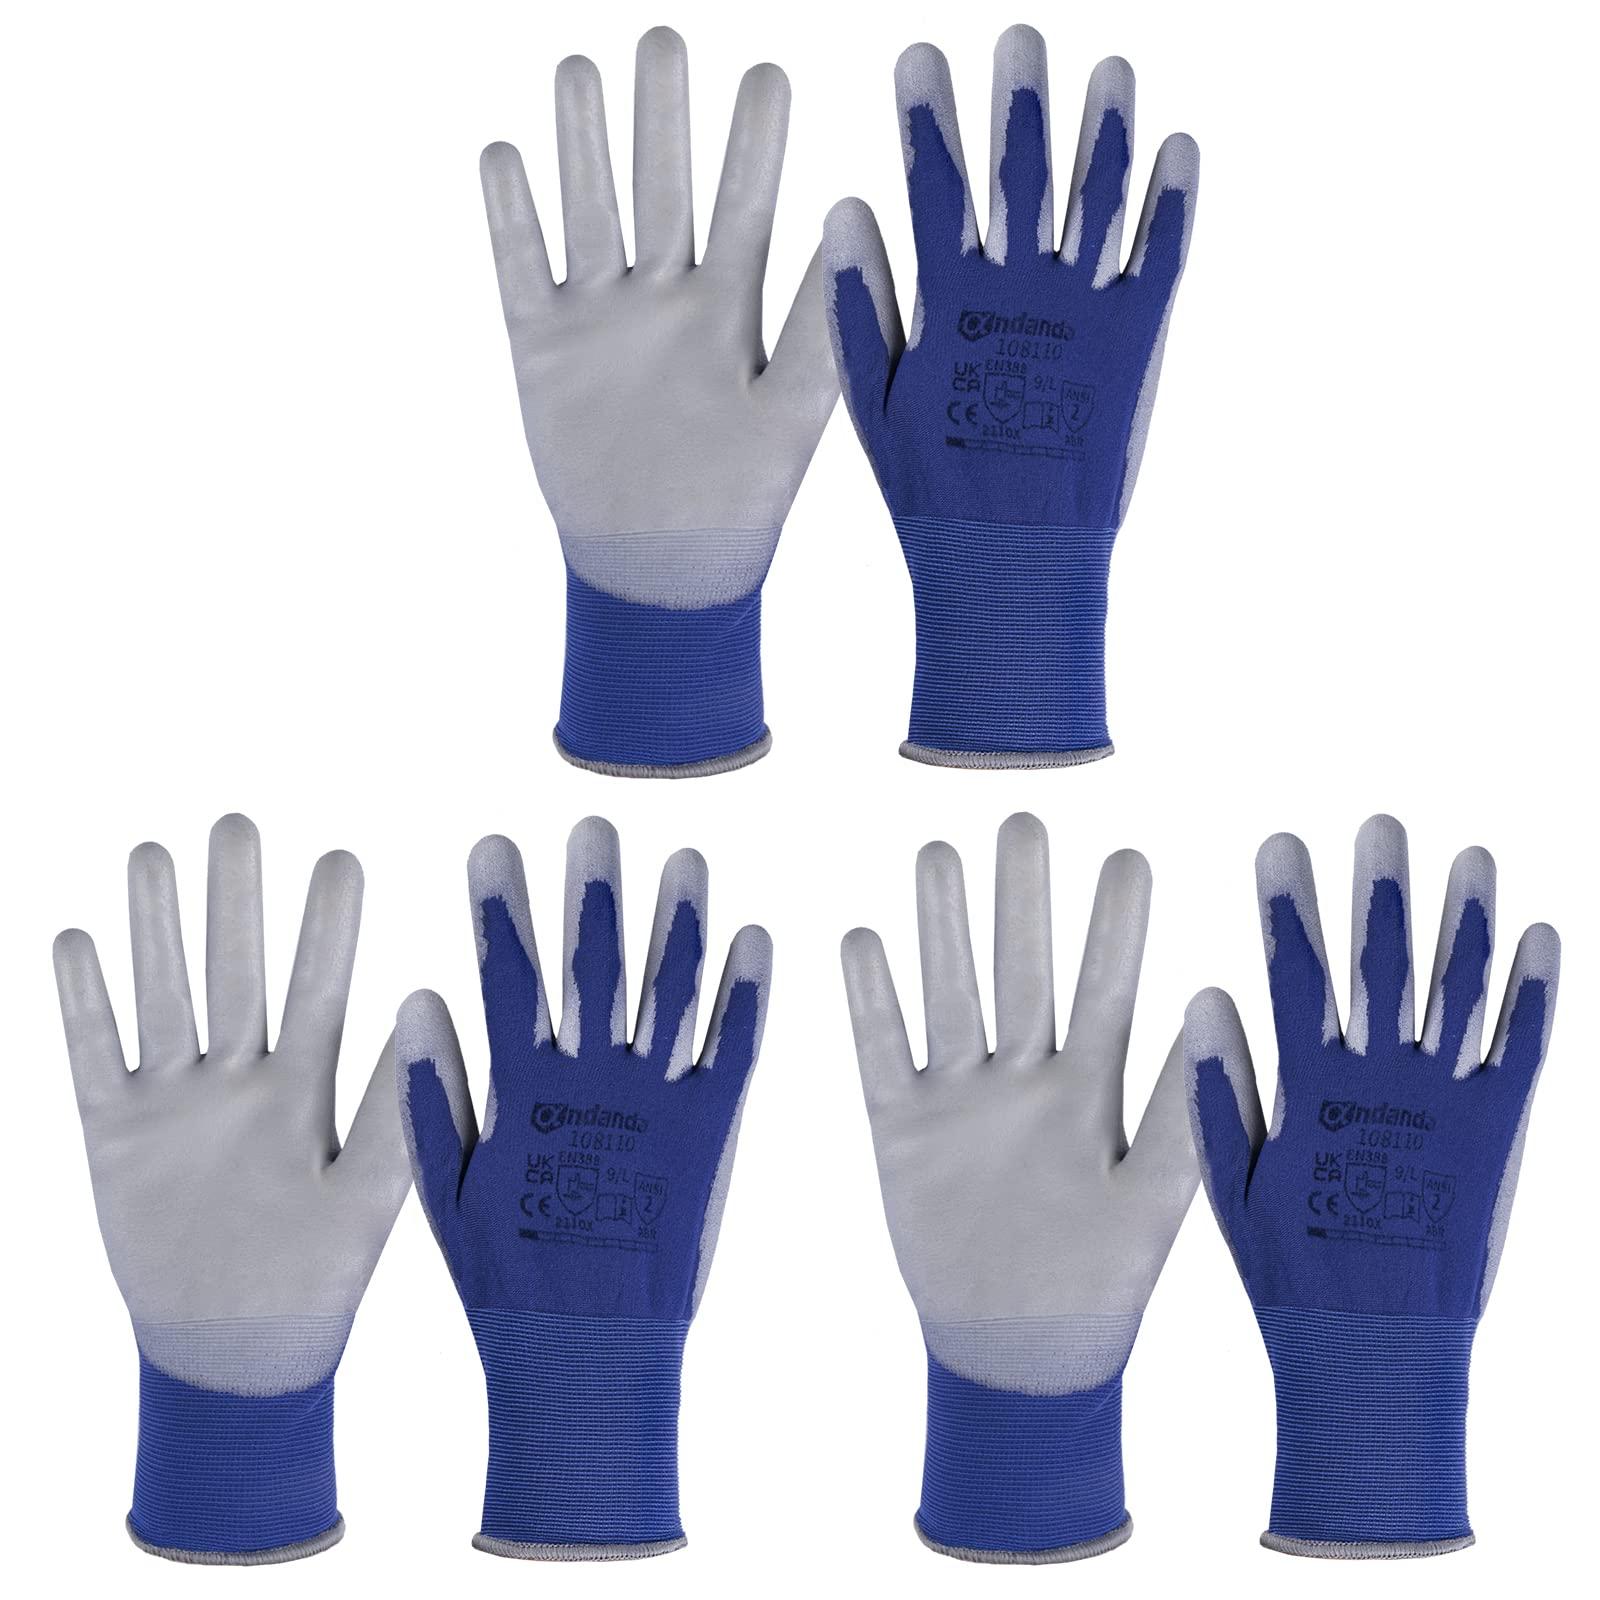 ANDANDA 12 Pairs Ultimate lightweight Precision Safety Work Gloves, PU Coated, 18gauge Seamless Knit Nylon Glove, Ideal Work Gloves Men for Packaging, Inspection, Transport and Delivery, Blue/Medium 5